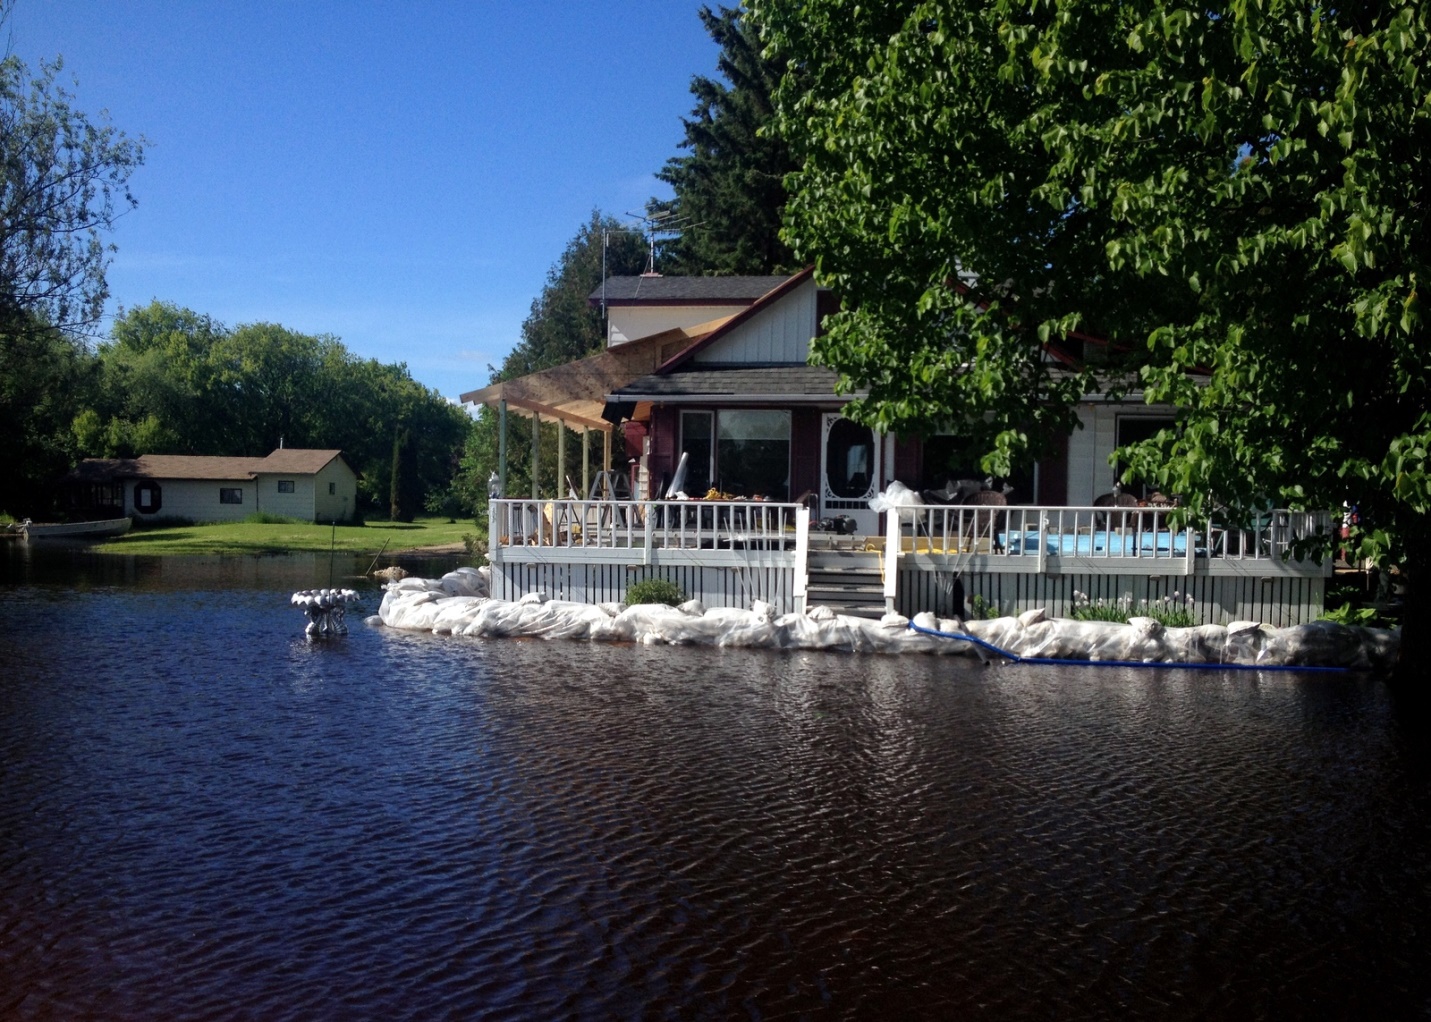 A home surrounded by sandbags in the town of Rainy River. Credit: IRLWWB.